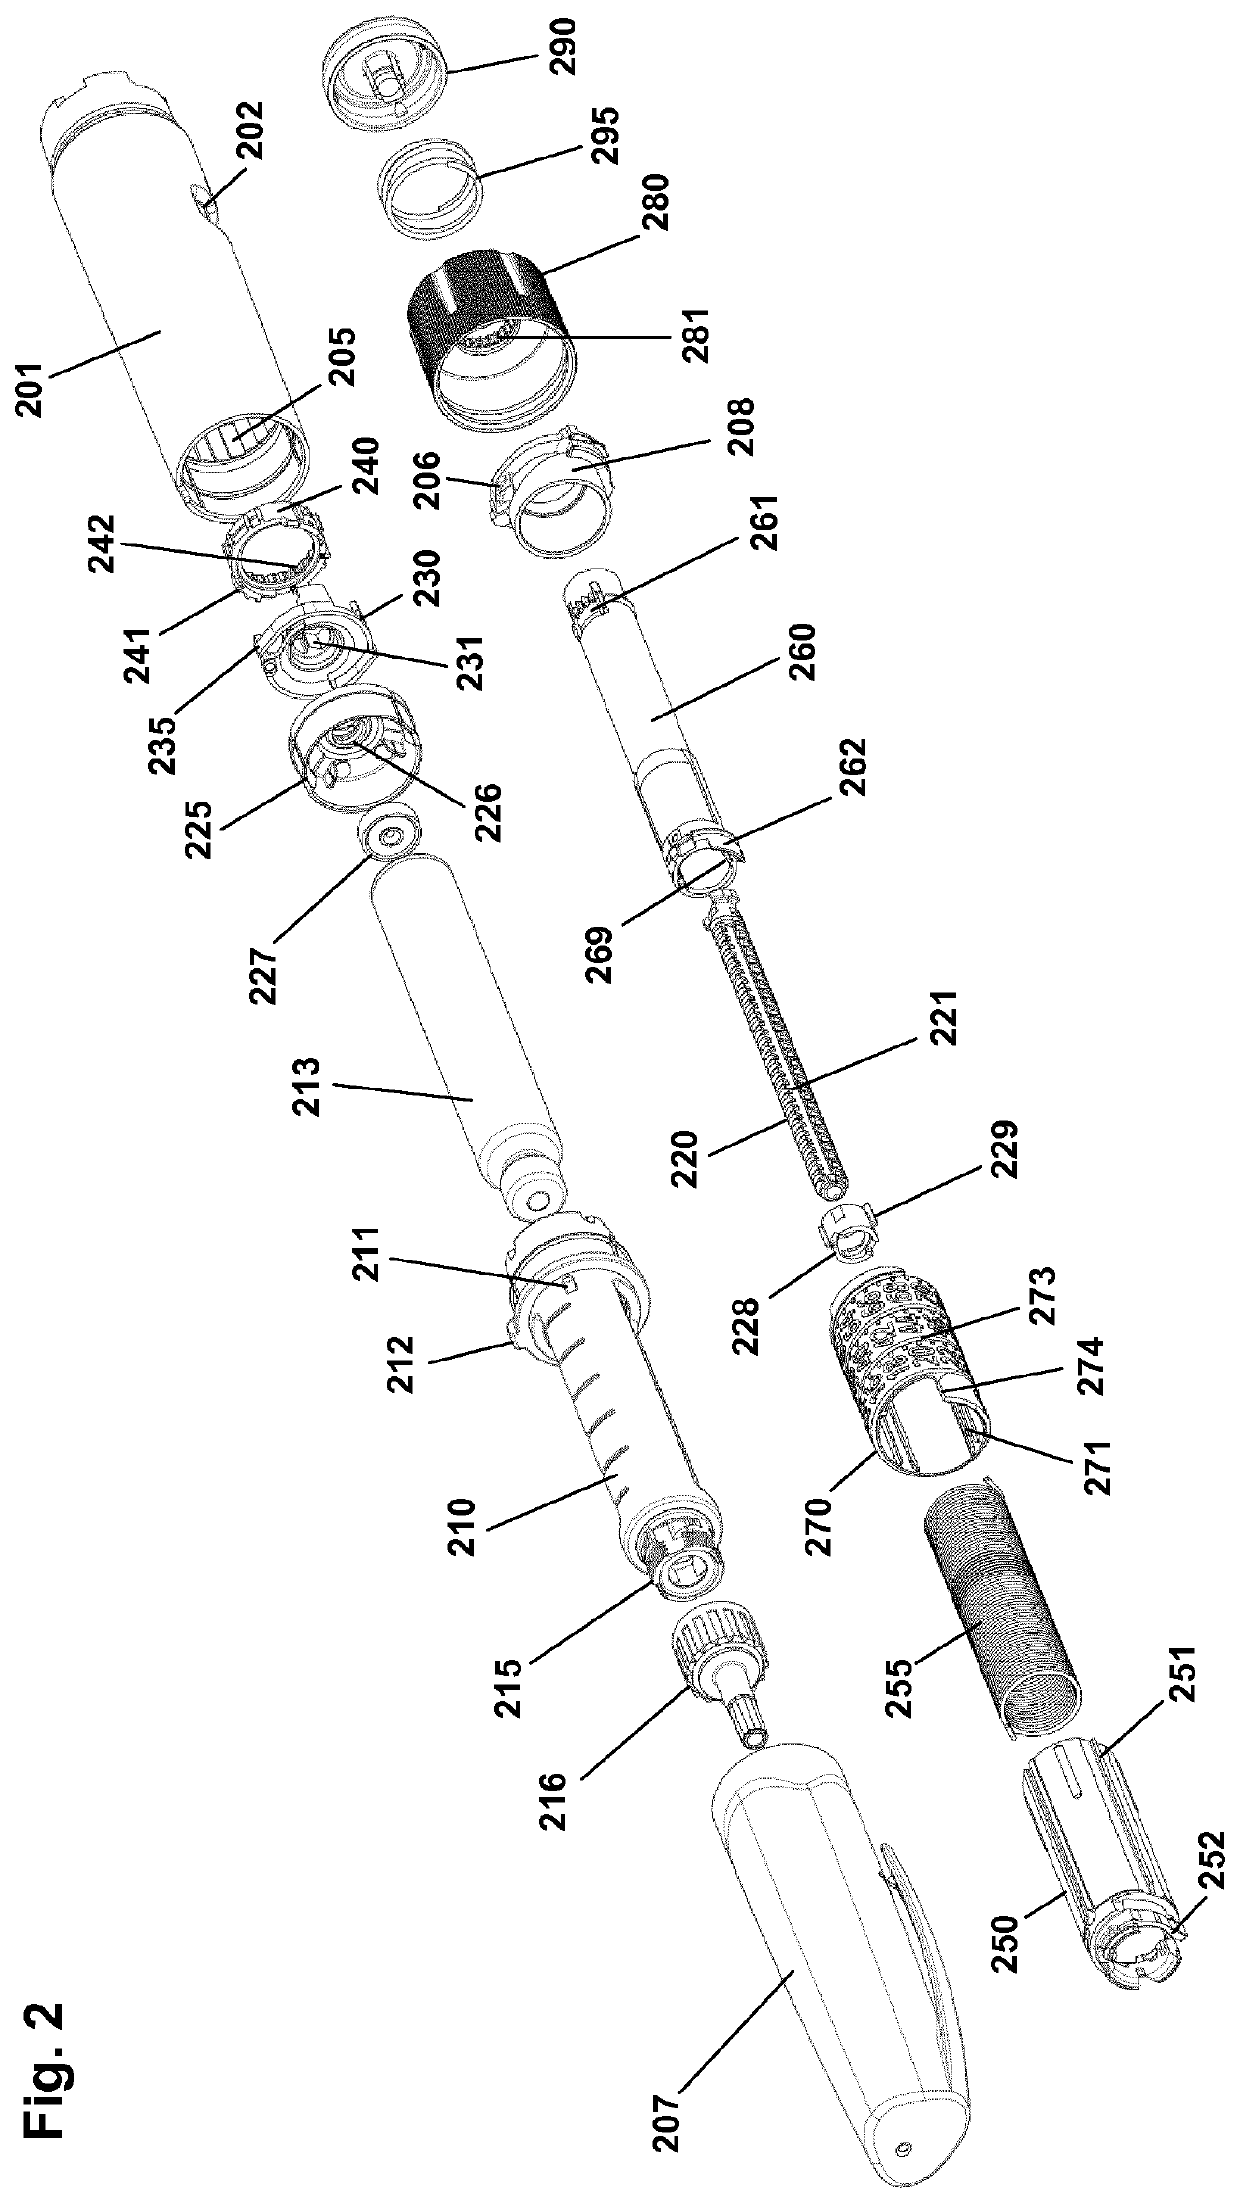 Drug delivery device with sound transducer